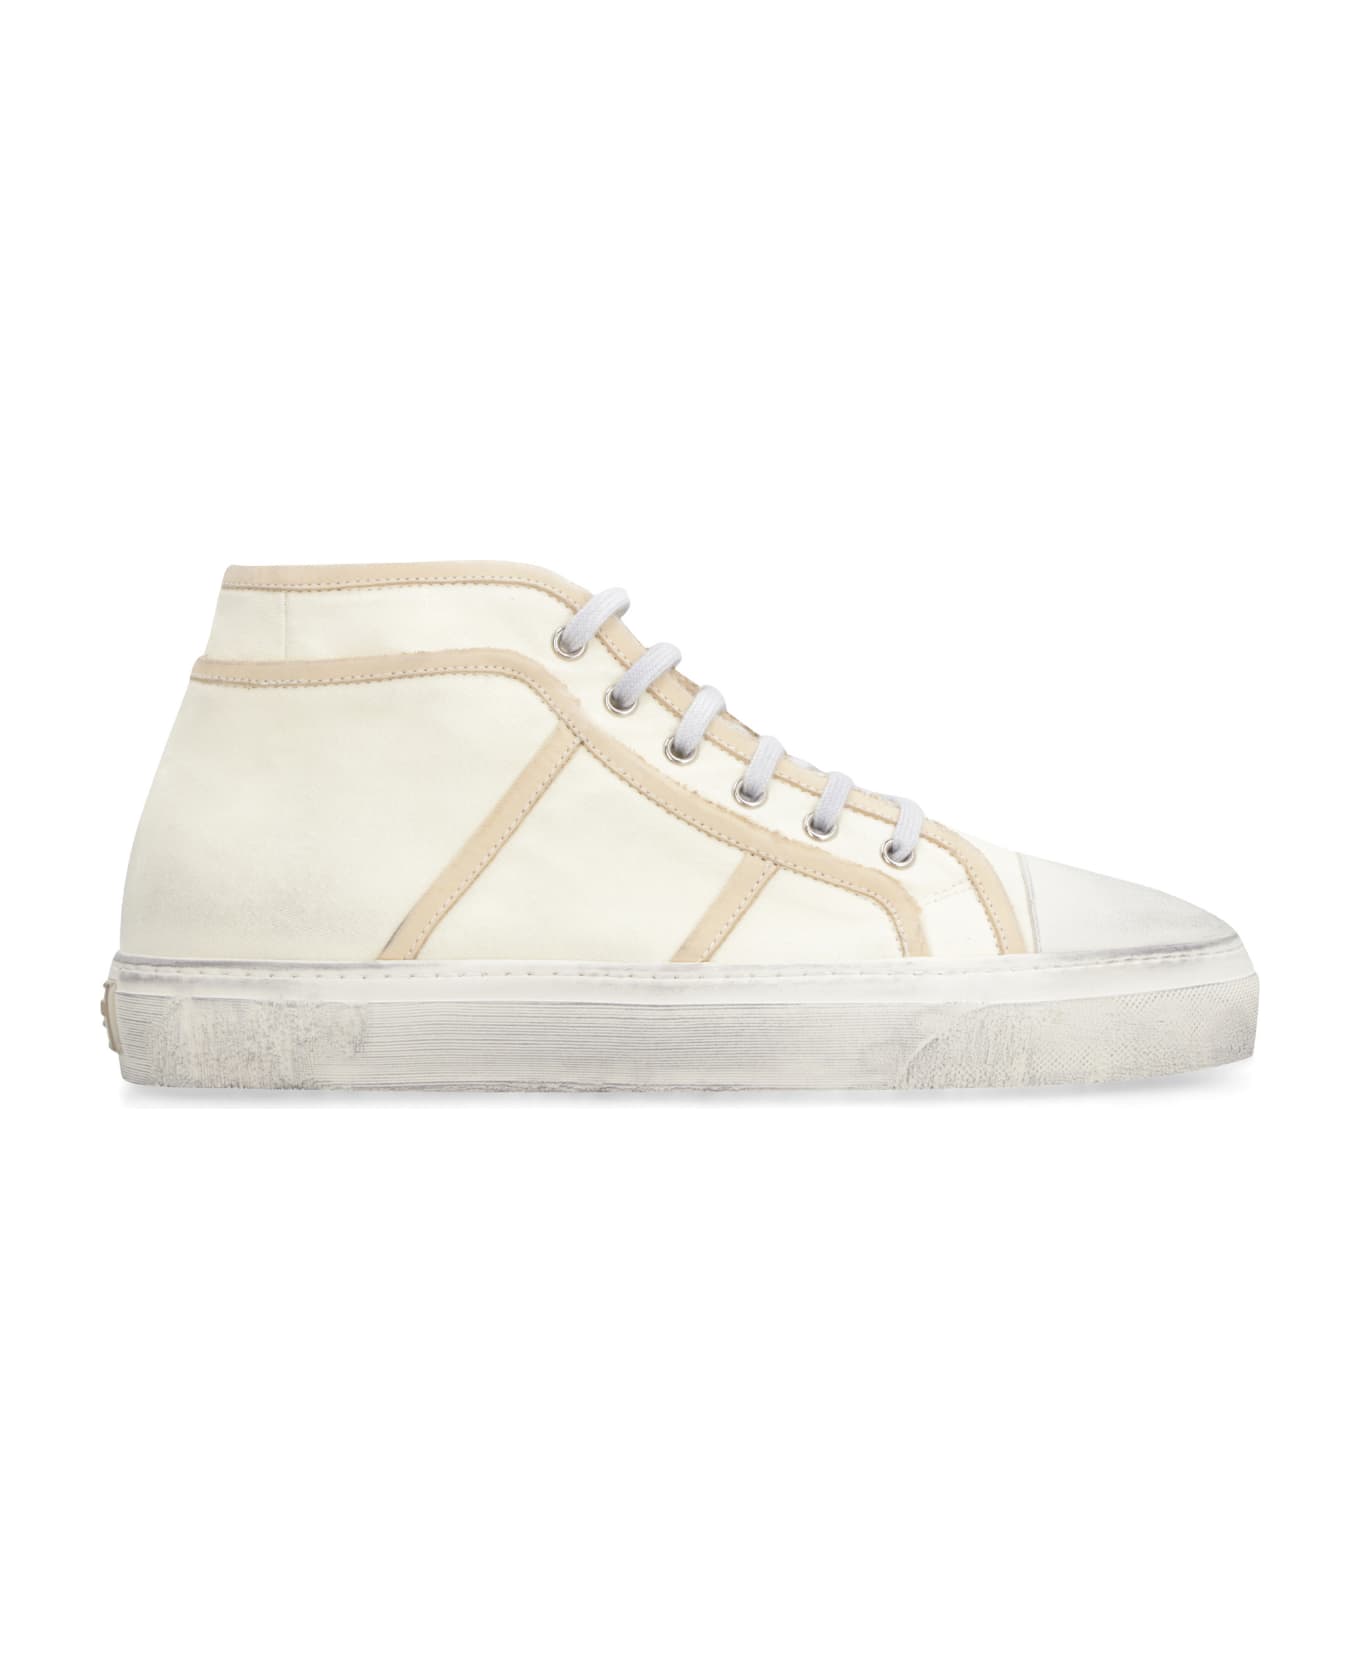 Dolce & Gabbana Canvas Mid-top Sneakers - Ivory スニーカー